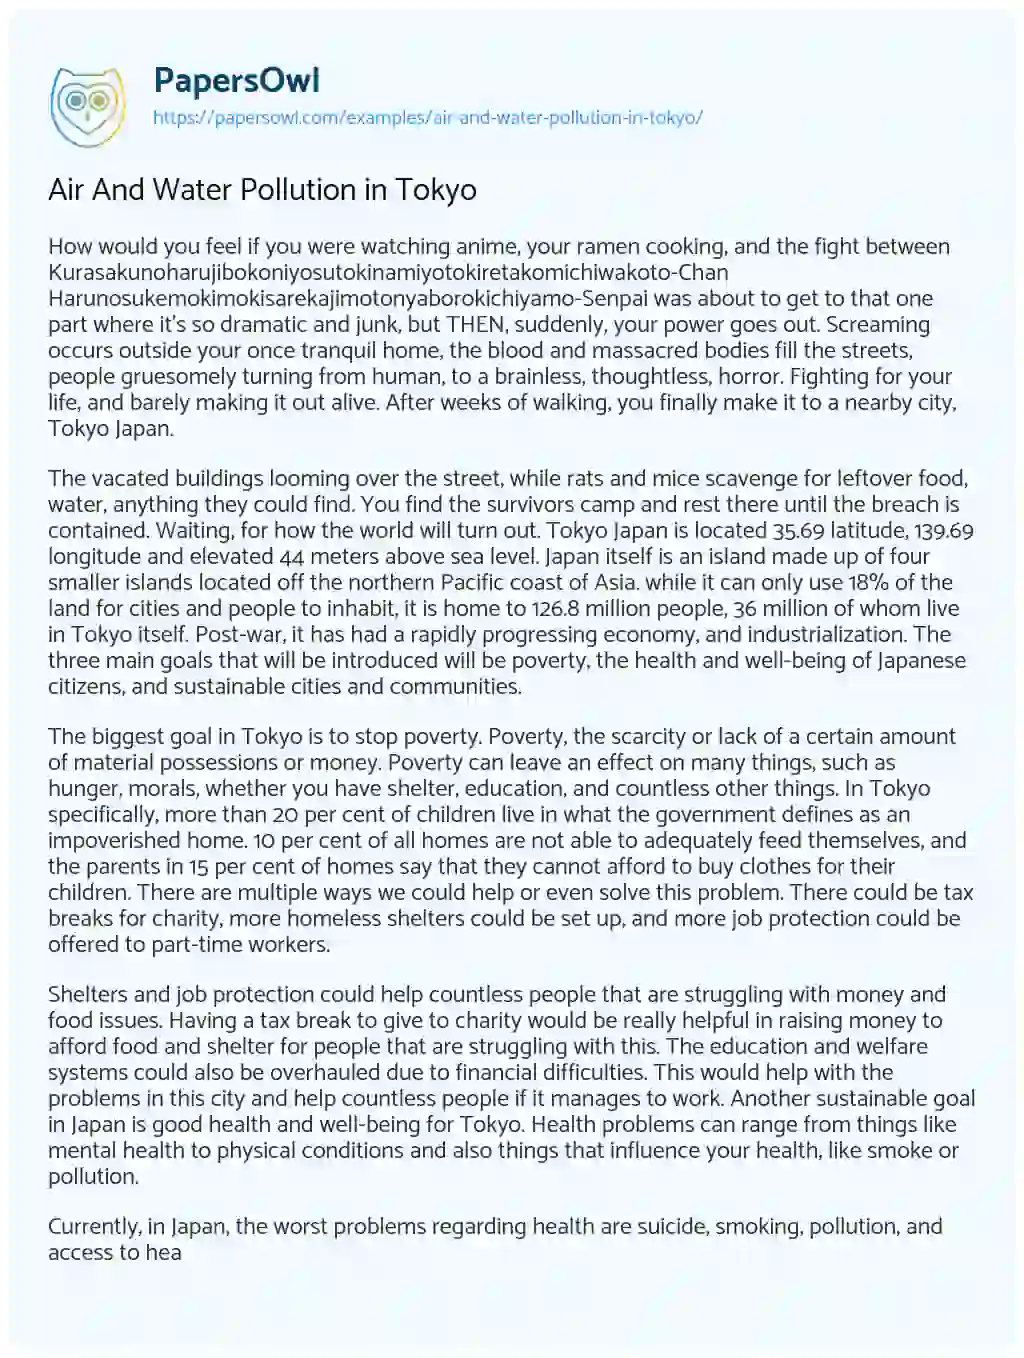 Air and Water Pollution in Tokyo essay